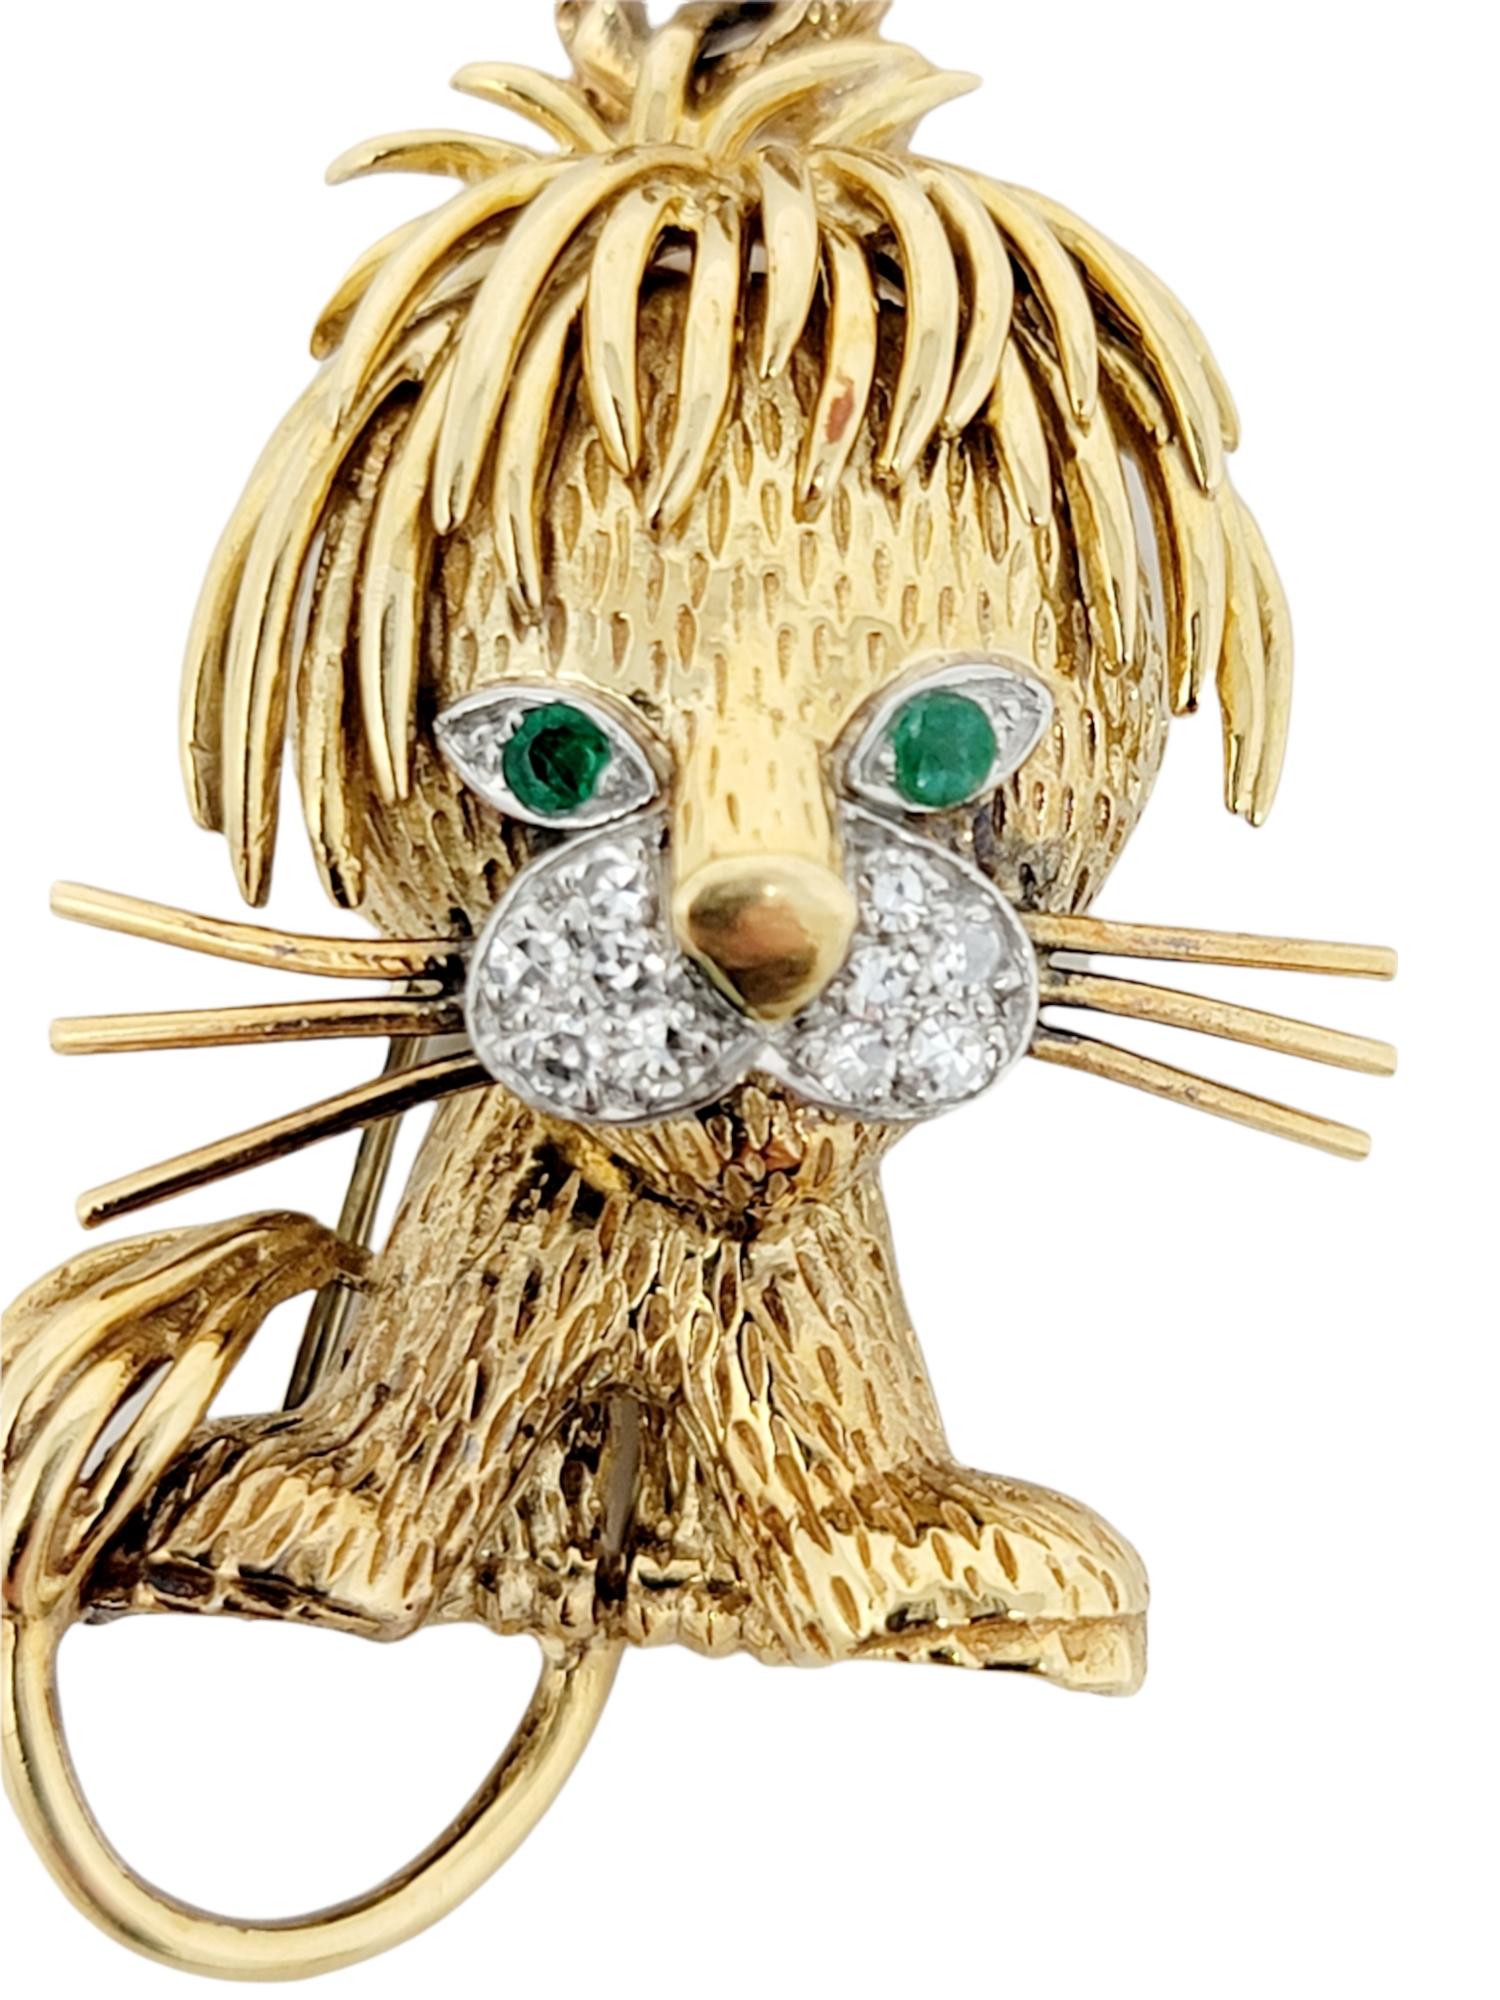 Stunningly detailed lion cub brooch accented with glittering diamonds and emeralds. Made of solid 18 karat yellow gold, this exquisite piece by Van Cleef & Arpels is a work of art and a fantastic conversation piece. 2 natural green emeralds act as